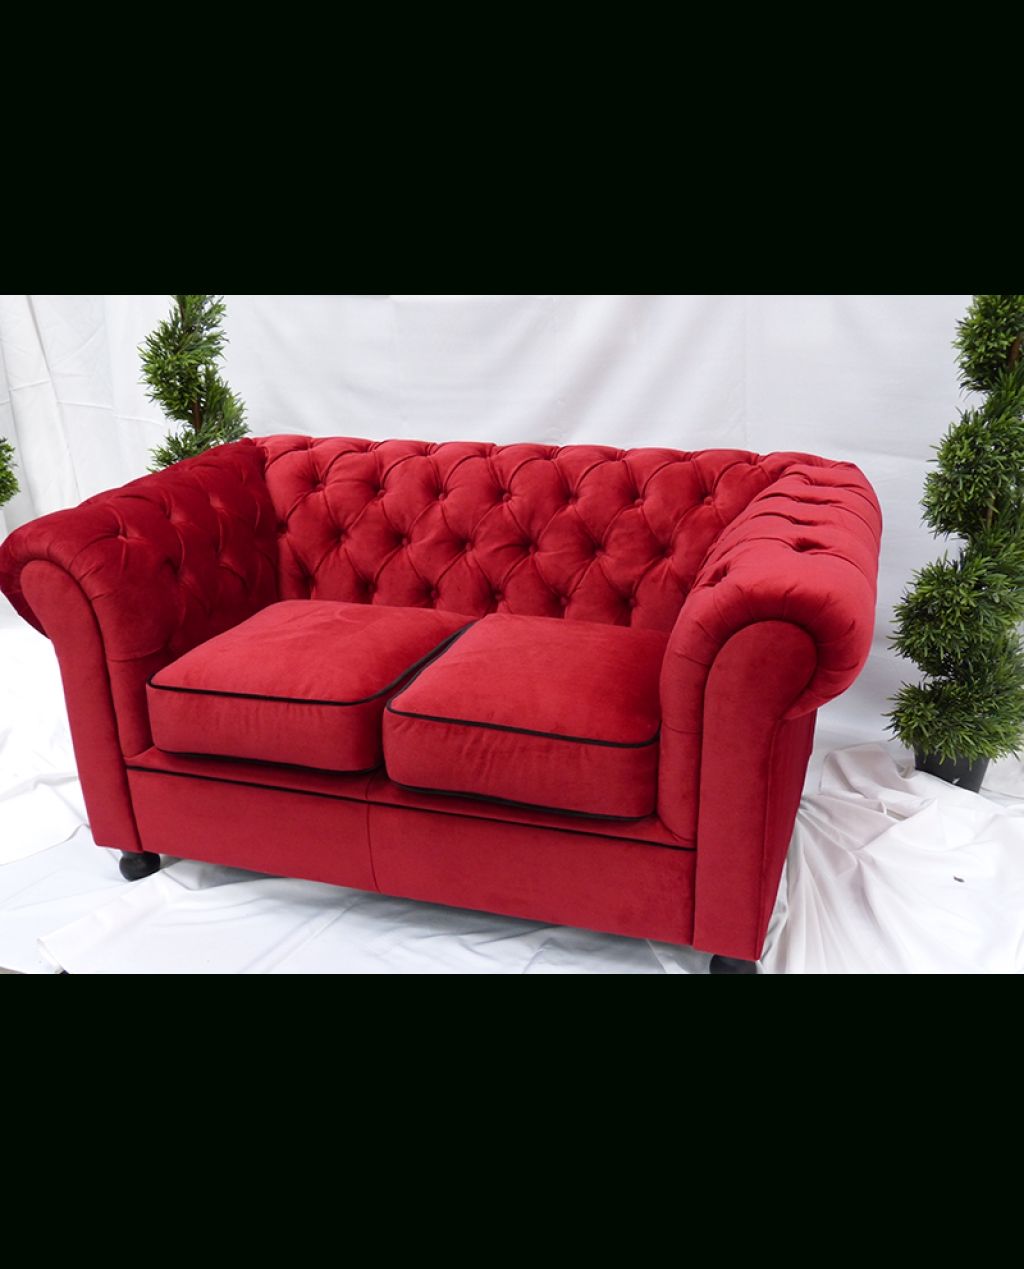 Red Velvet Chesterfield Style 3 Seater Sofa | City Furniture Hire Inside Red Chesterfield Sofas (View 13 of 15)